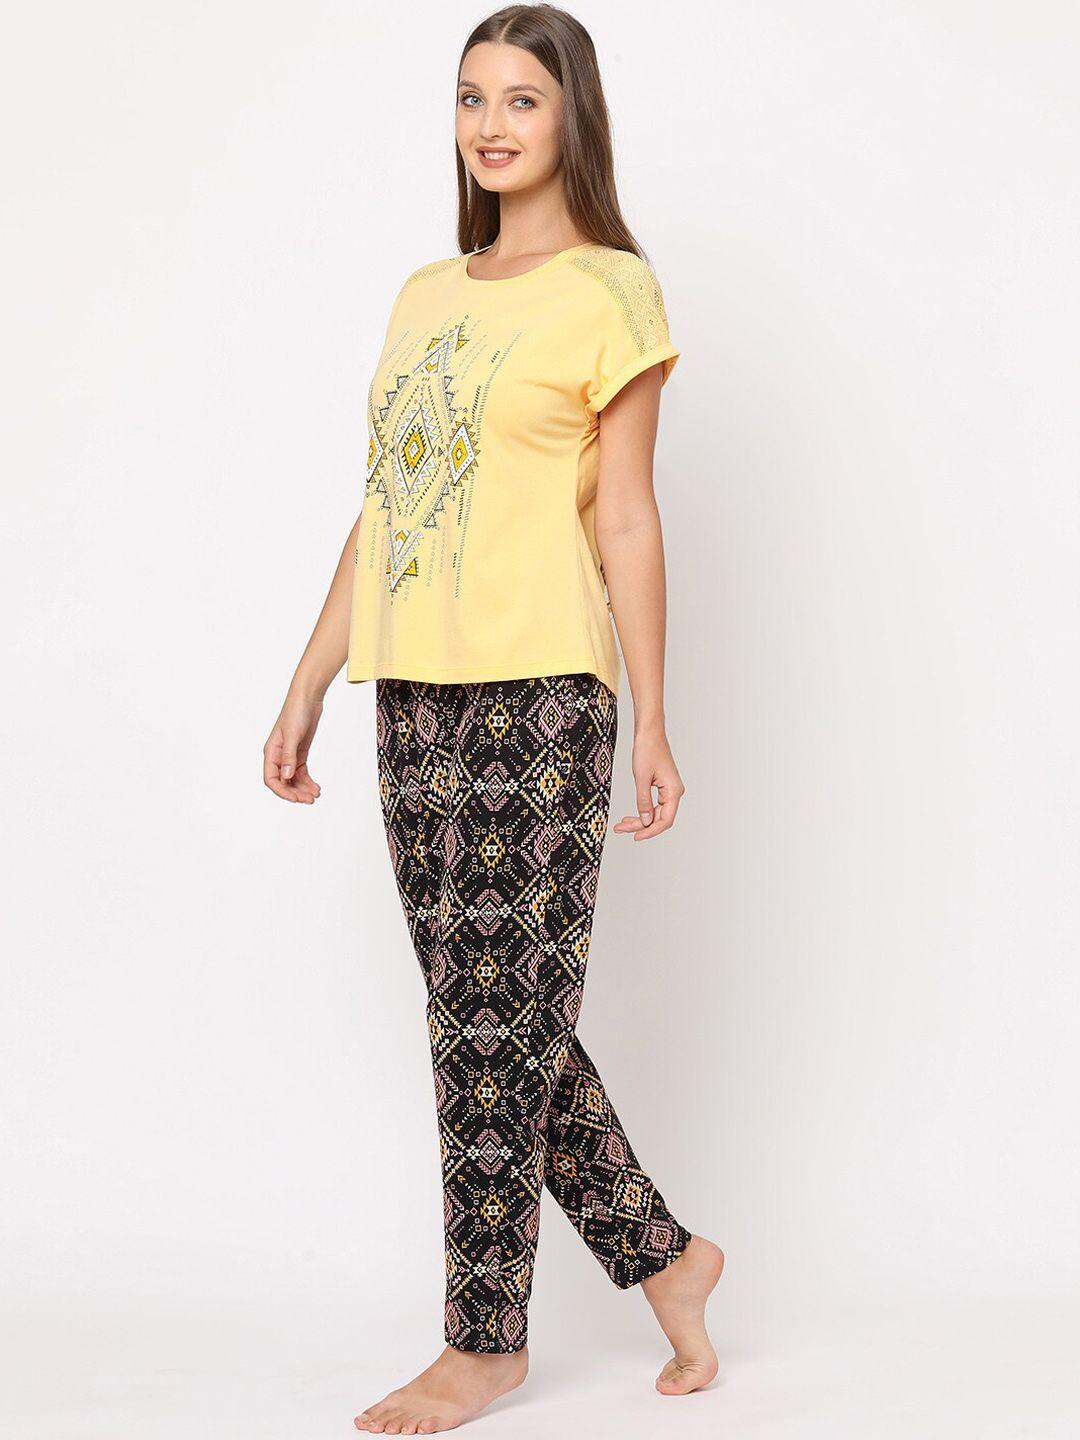 maysixty mid-rise printed lounge pant